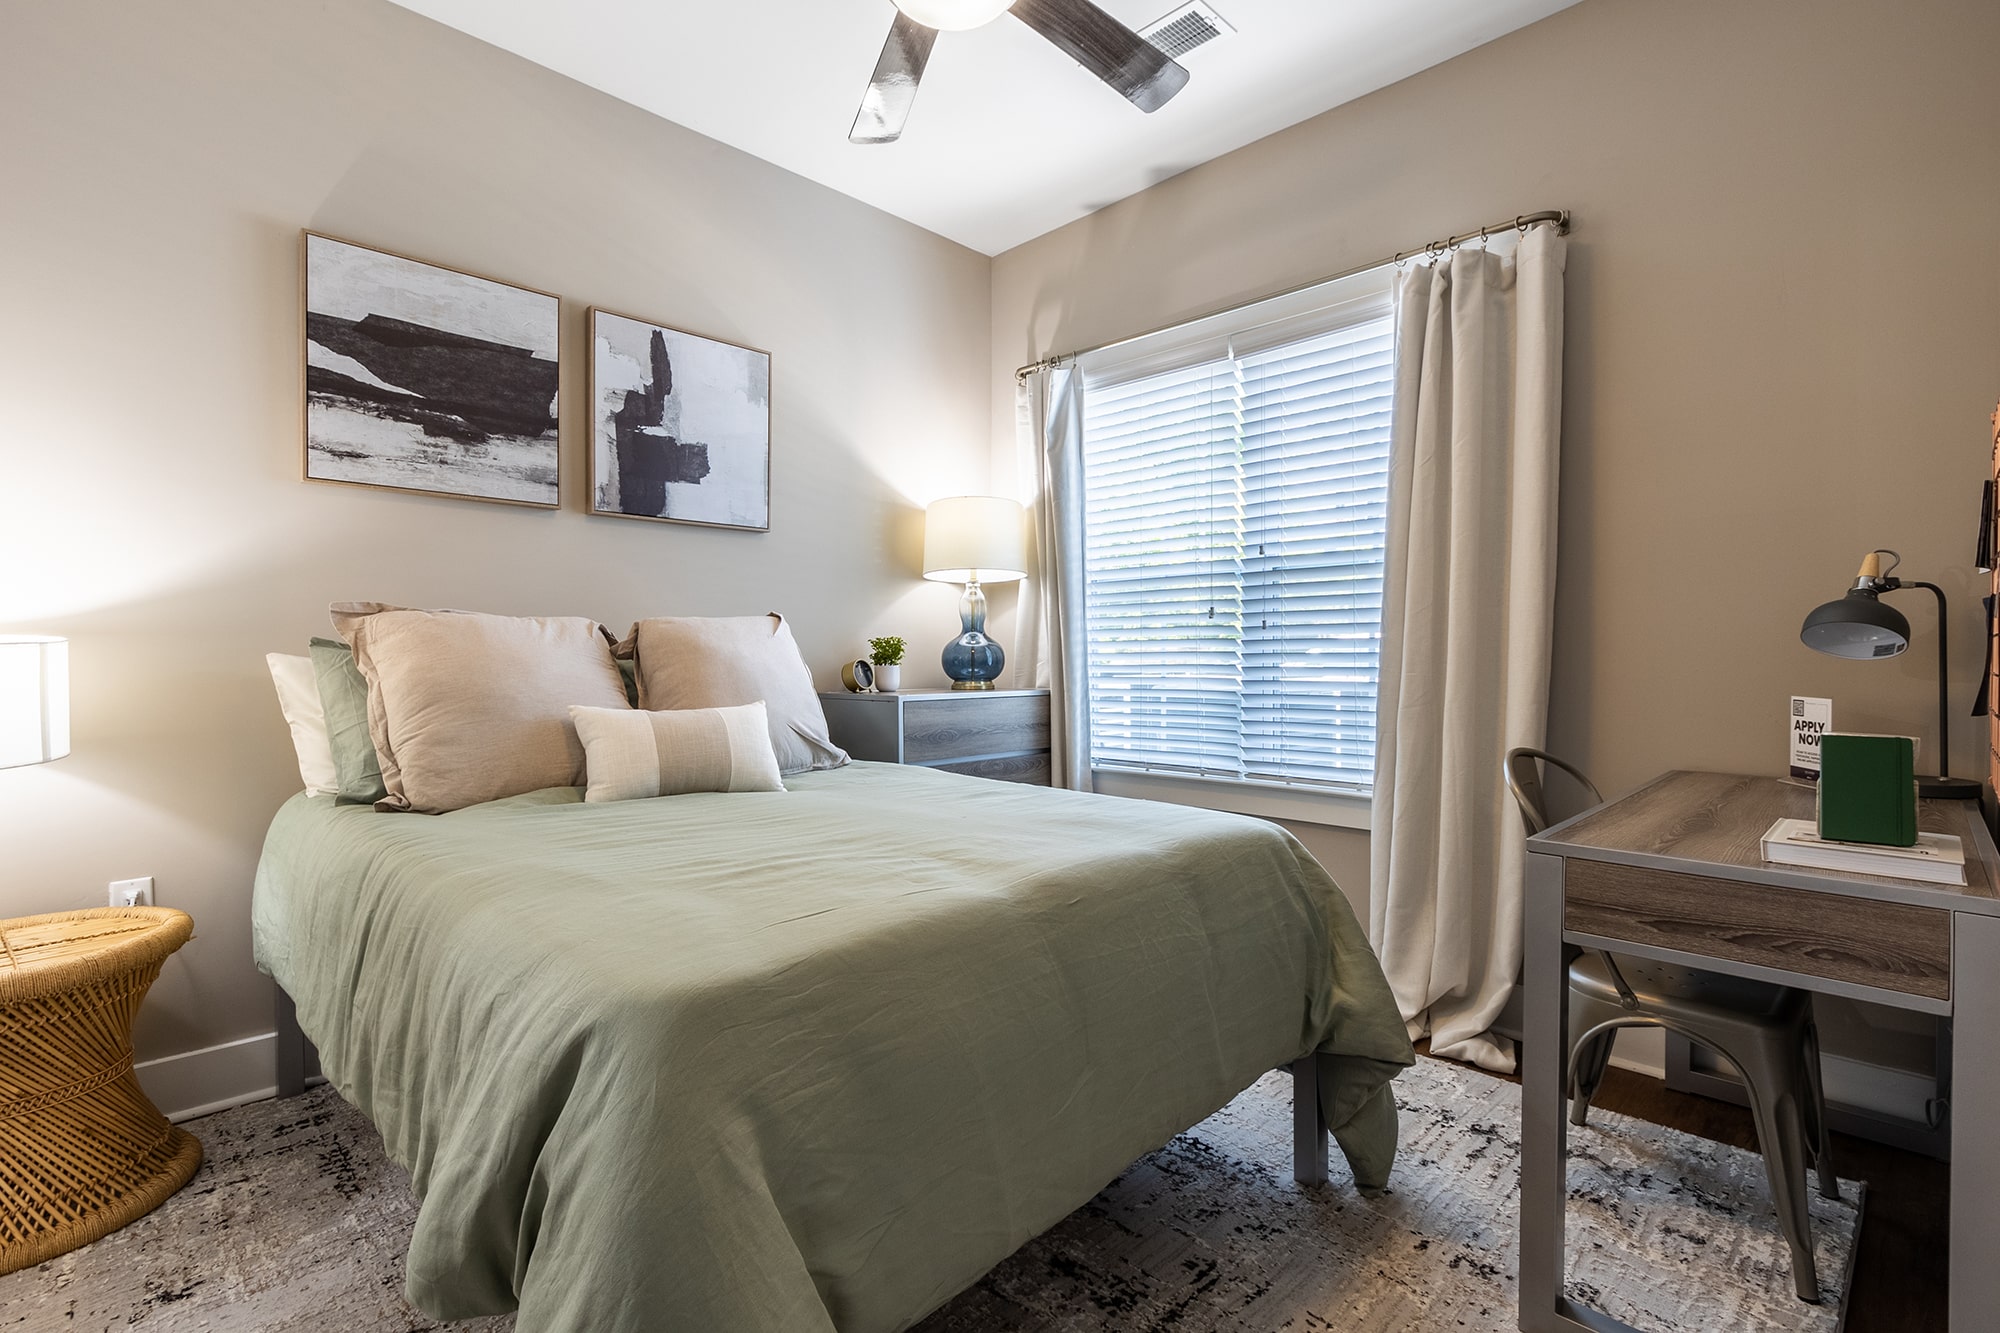 eastern on 10th apartments near east carolina university fully furnished private bedroom